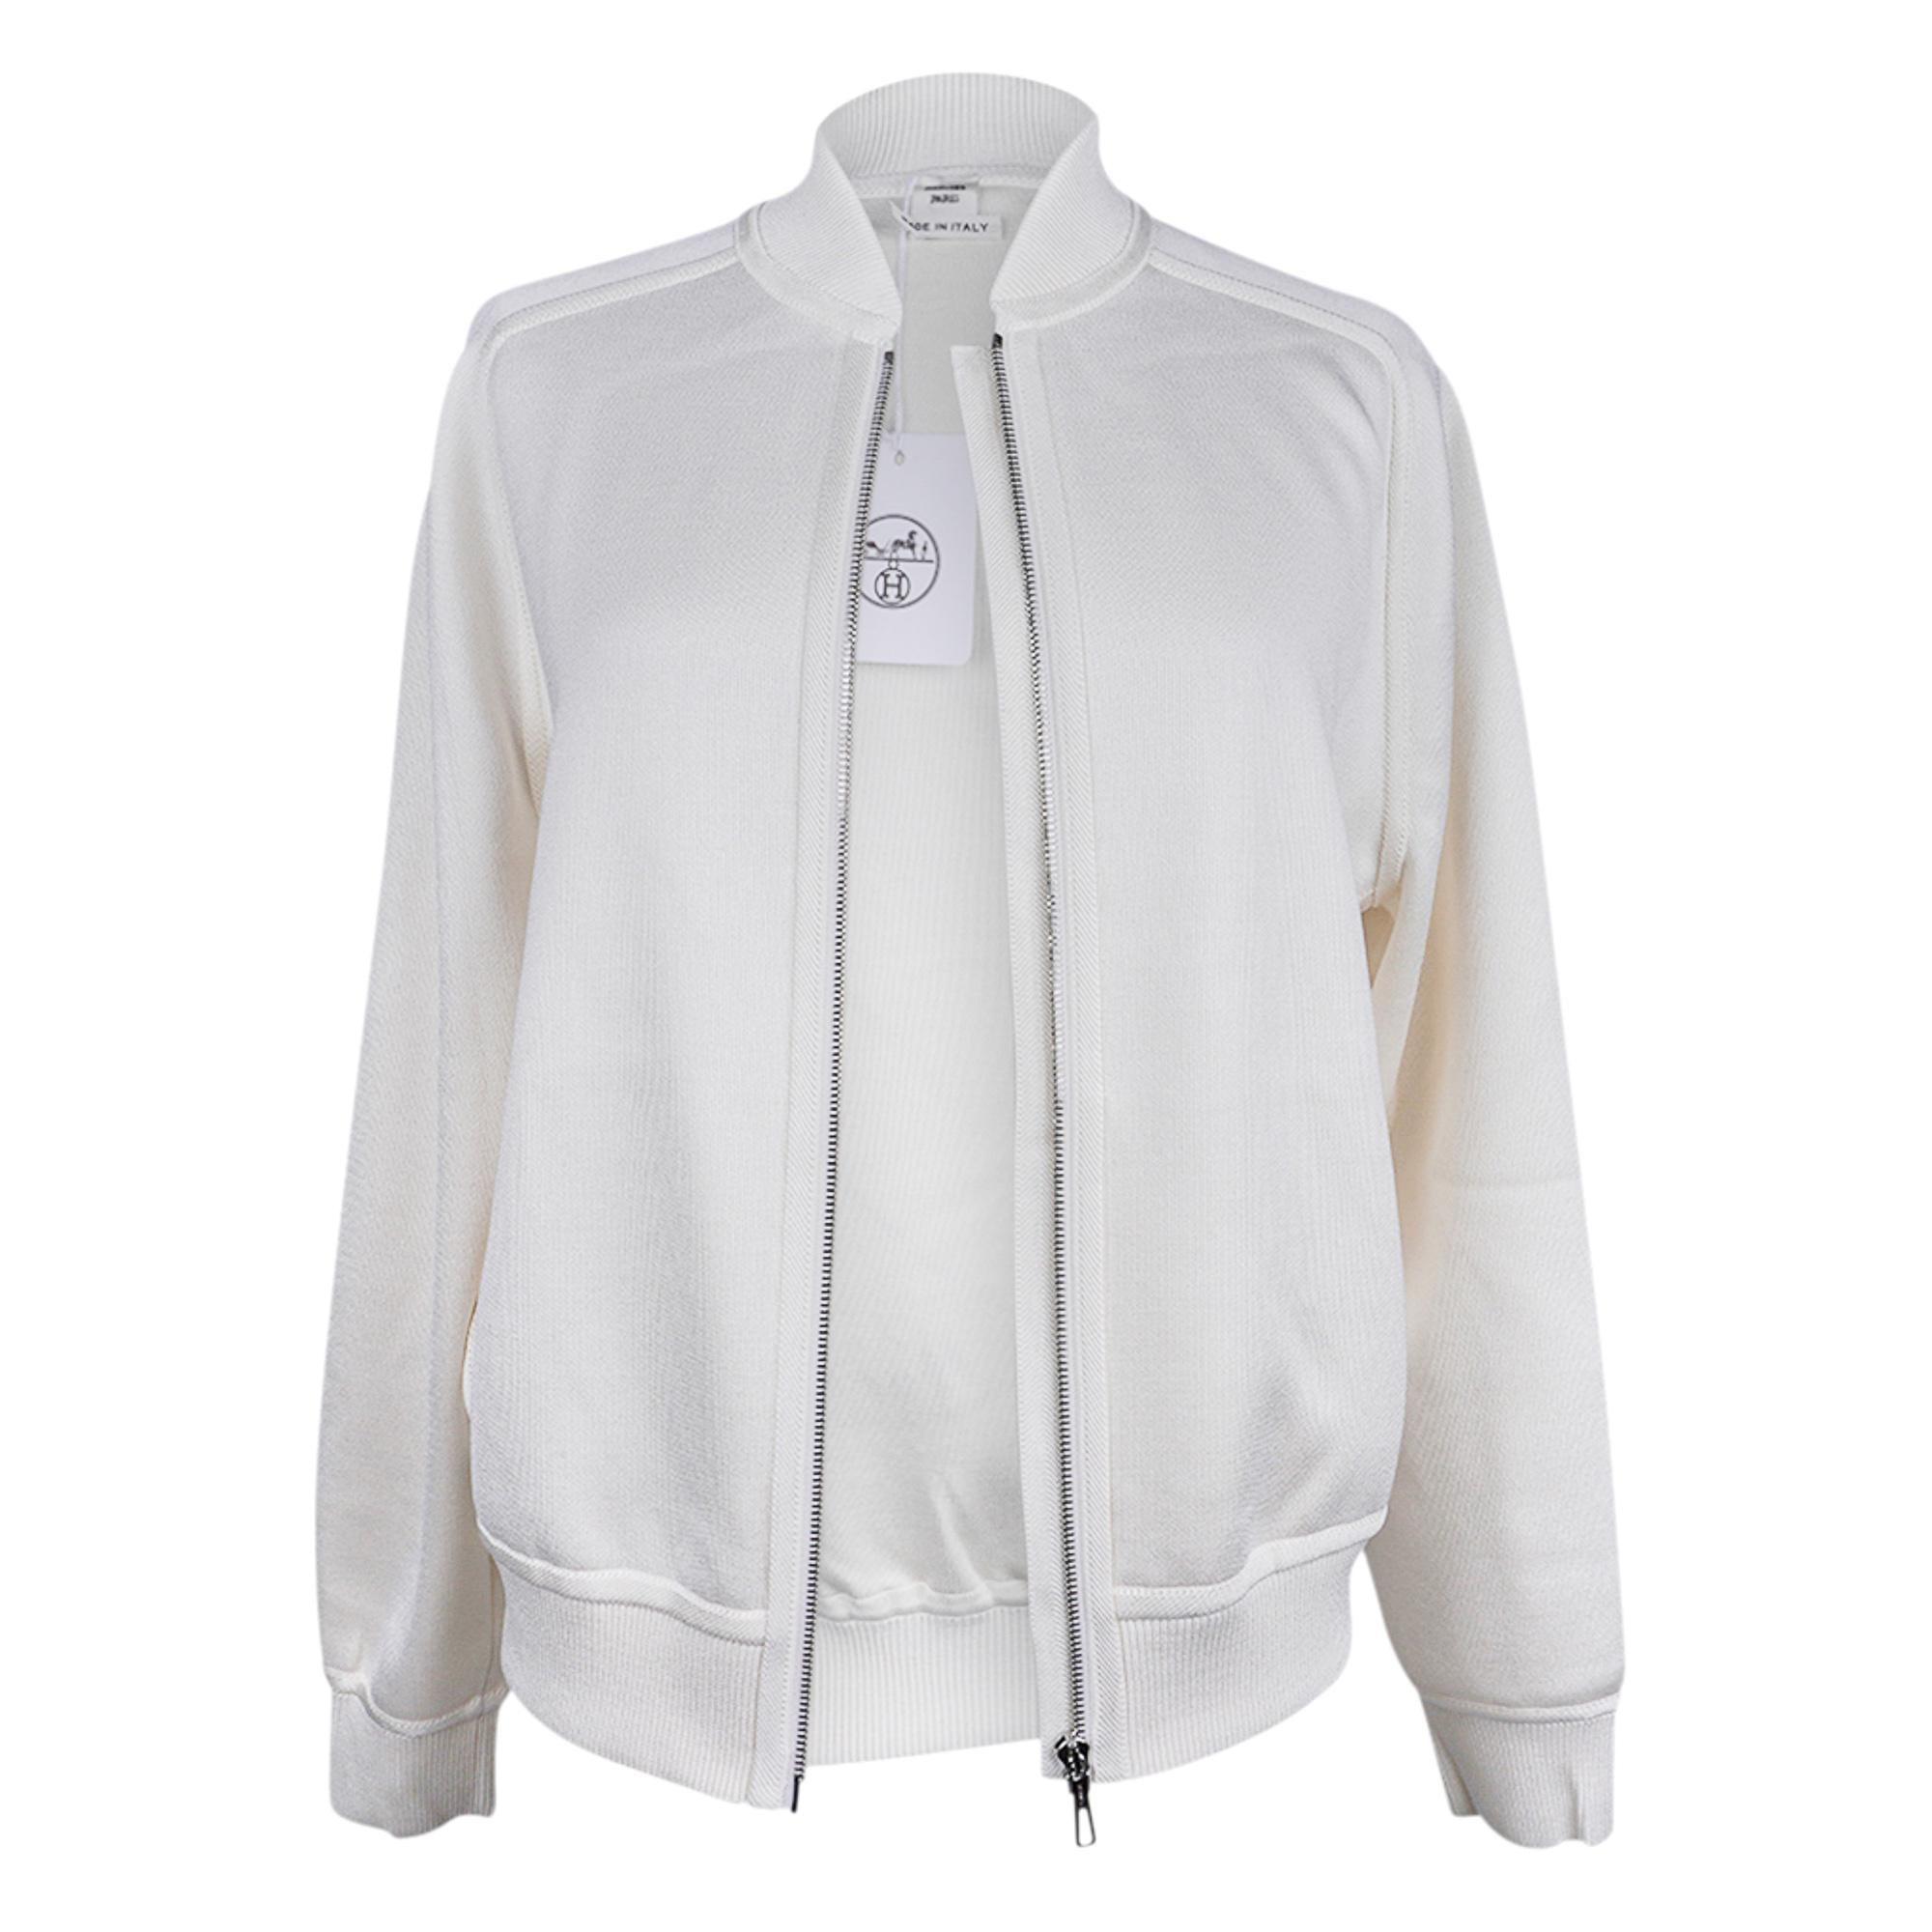 Hermes Cardigan Zip Clic Clac Winter White Jacket 38 / 6 For Sale 3